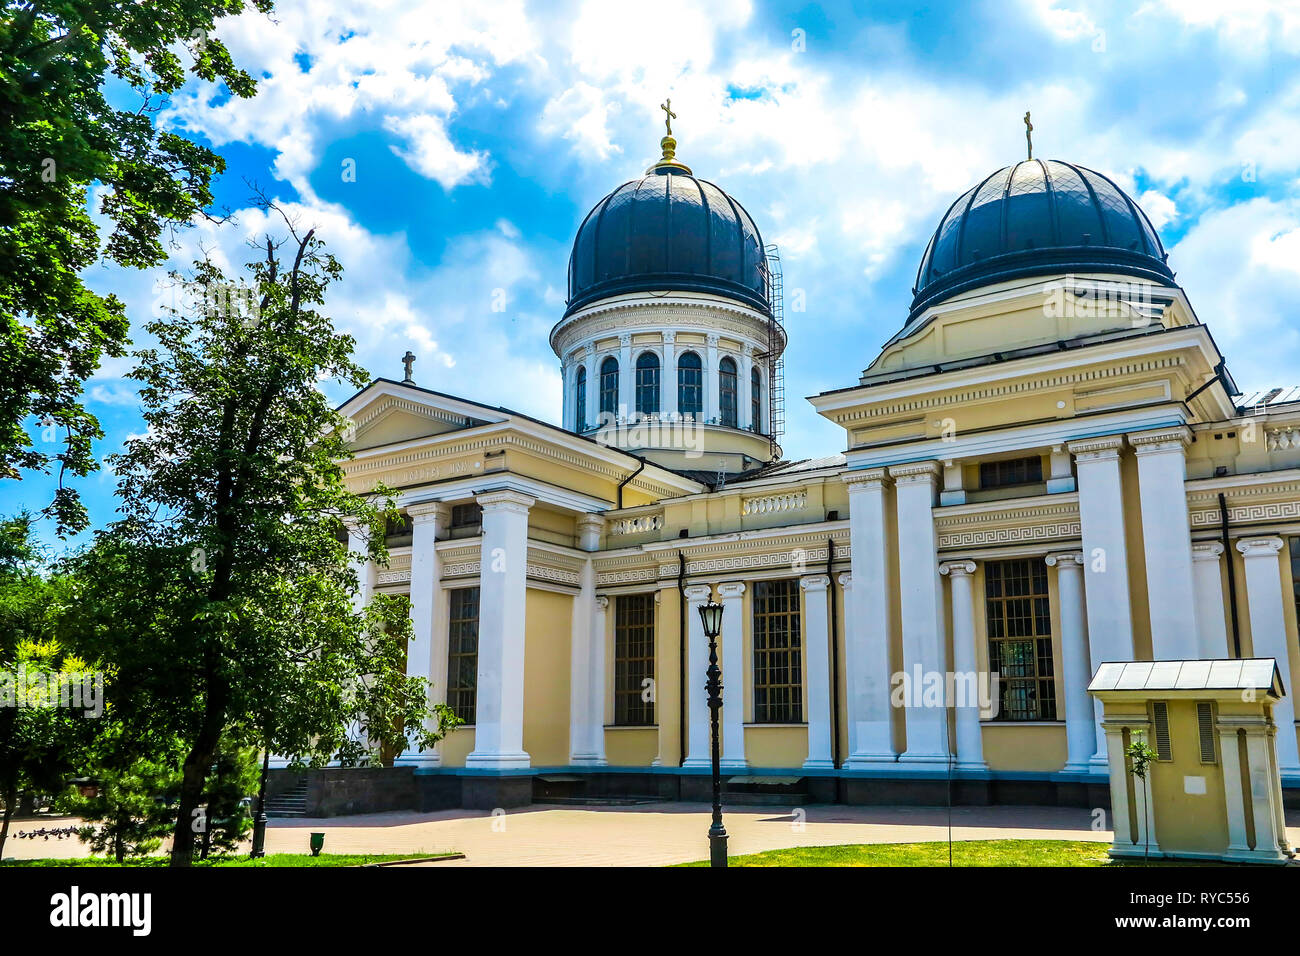 Odessa Spaso Preobrazhensky Cathedral Side View with Cupola and Golden Cross Stock Photo